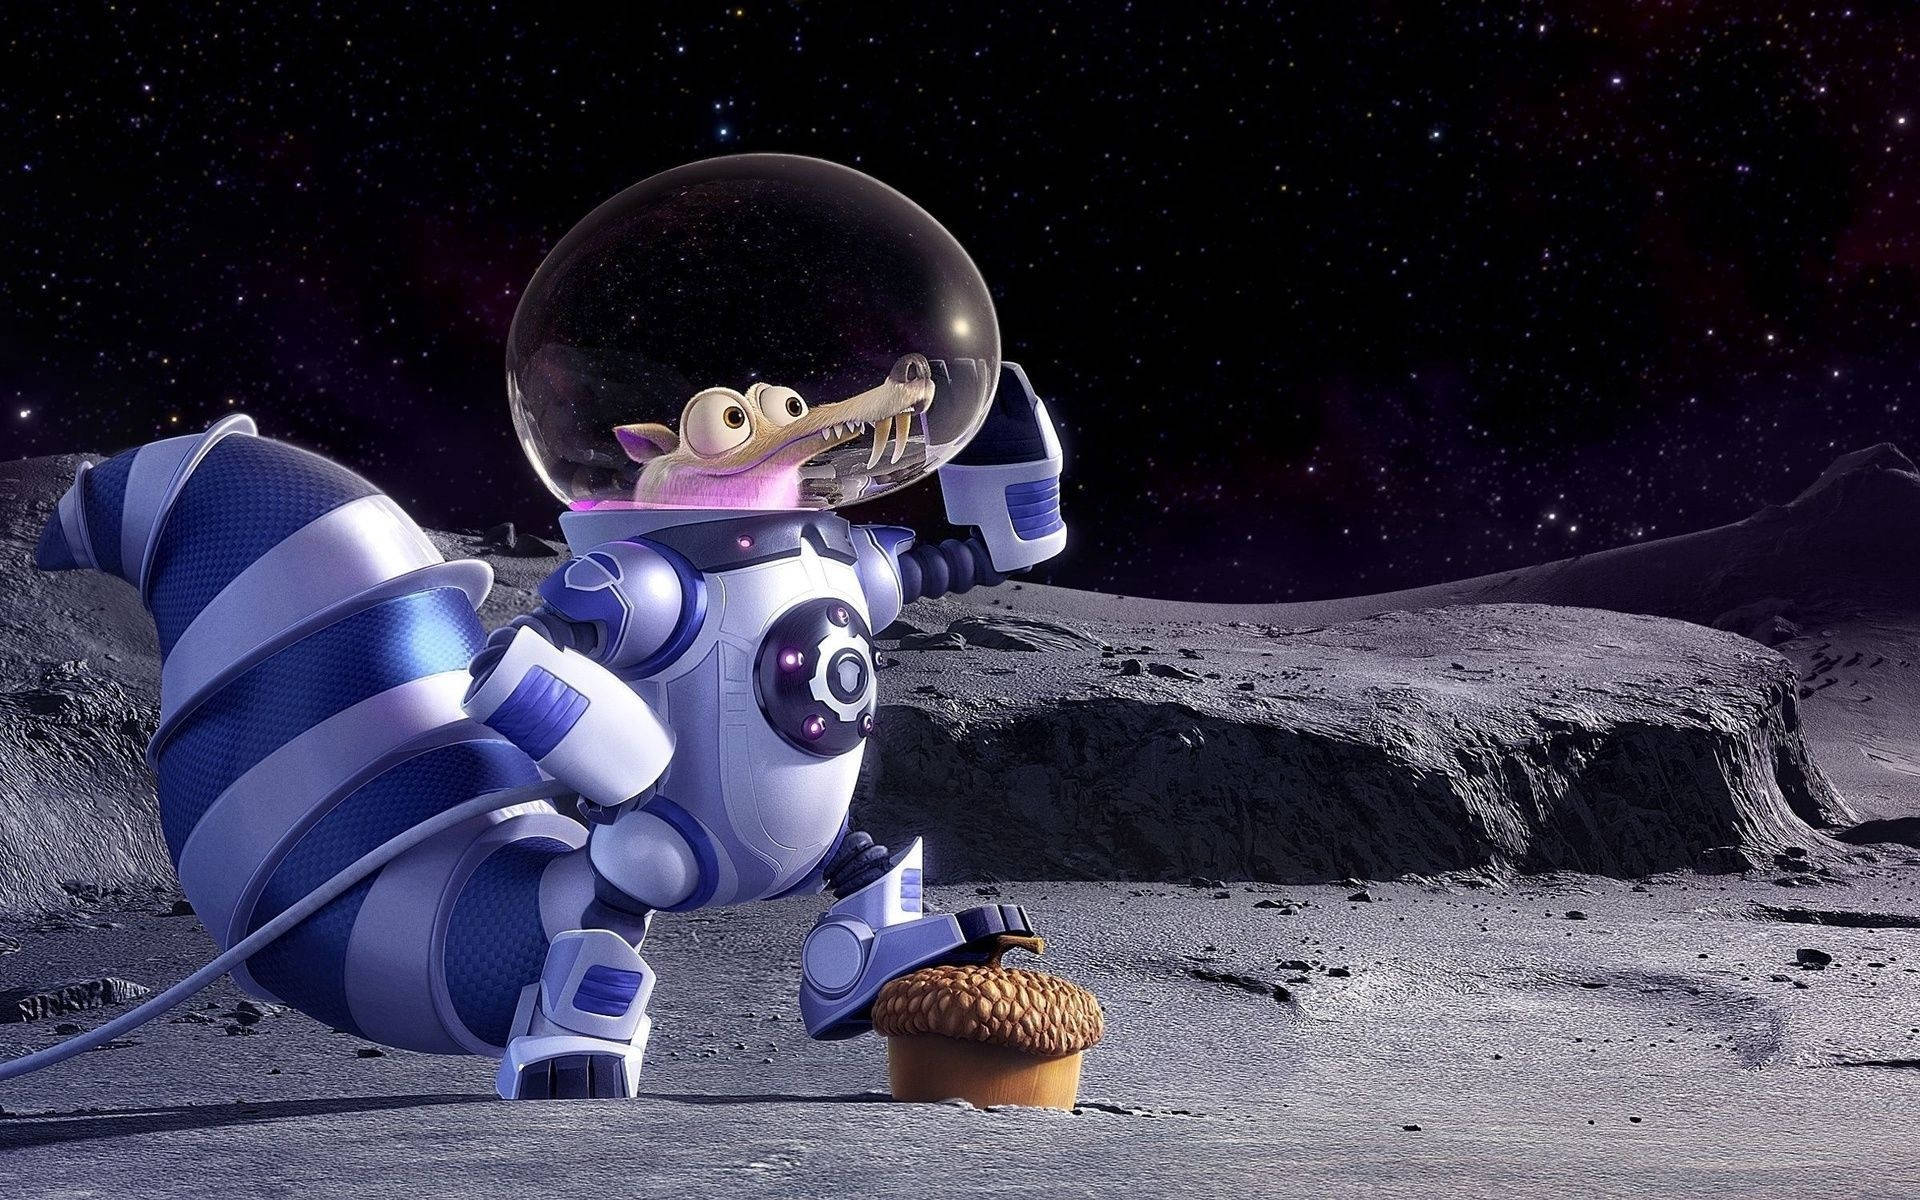 Ice Age Collision Course Wallpaper